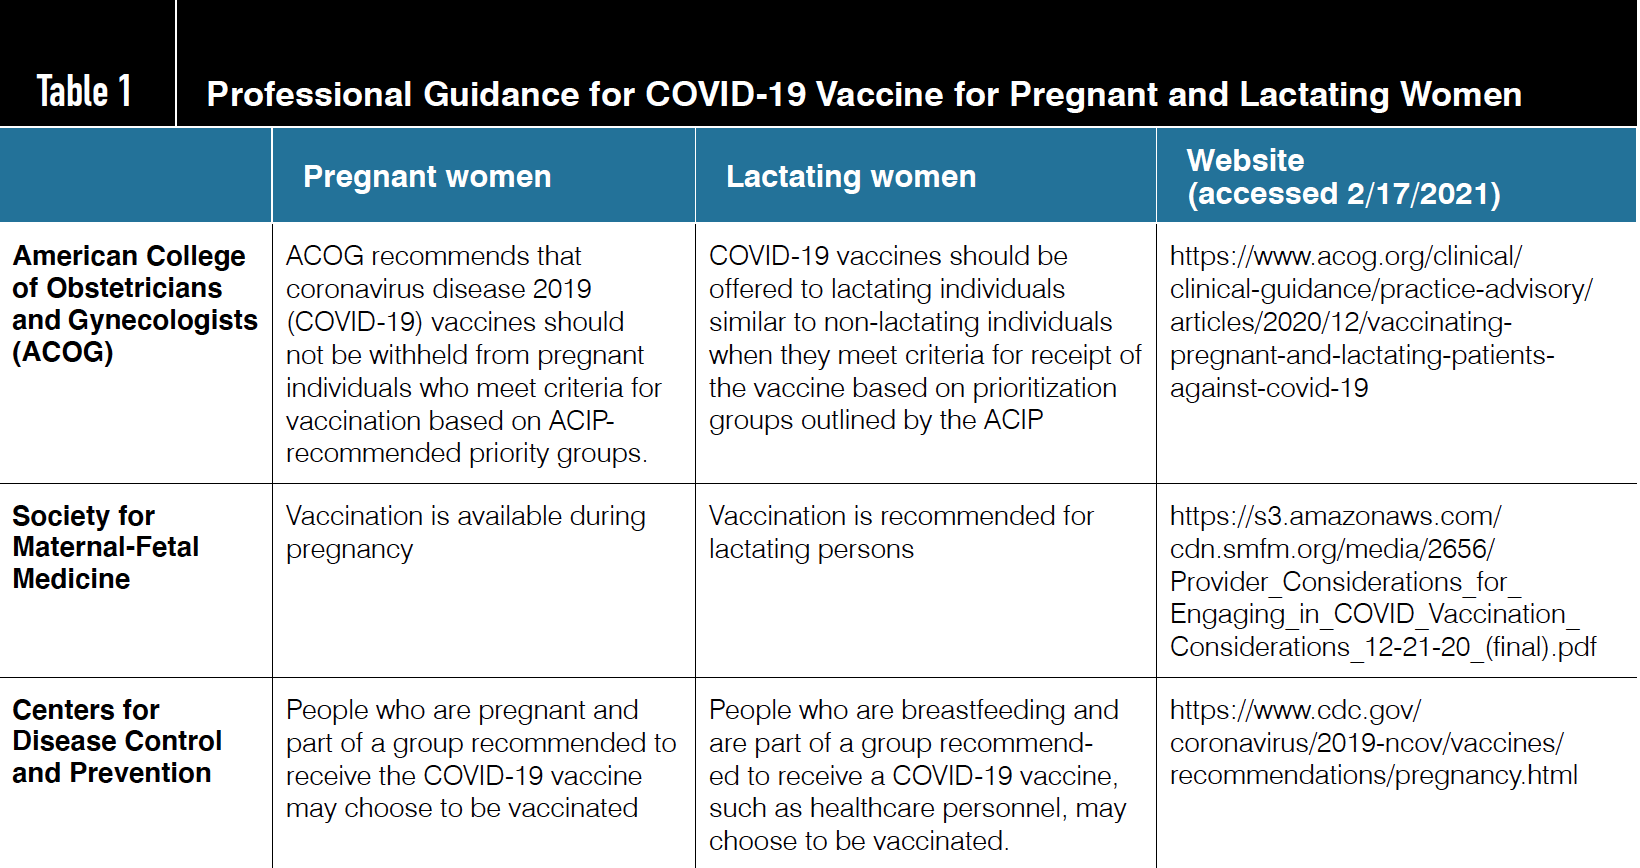 Table 1. Professional Guidance for COVID-19 Vaccine for Pregnant and Lactating Women